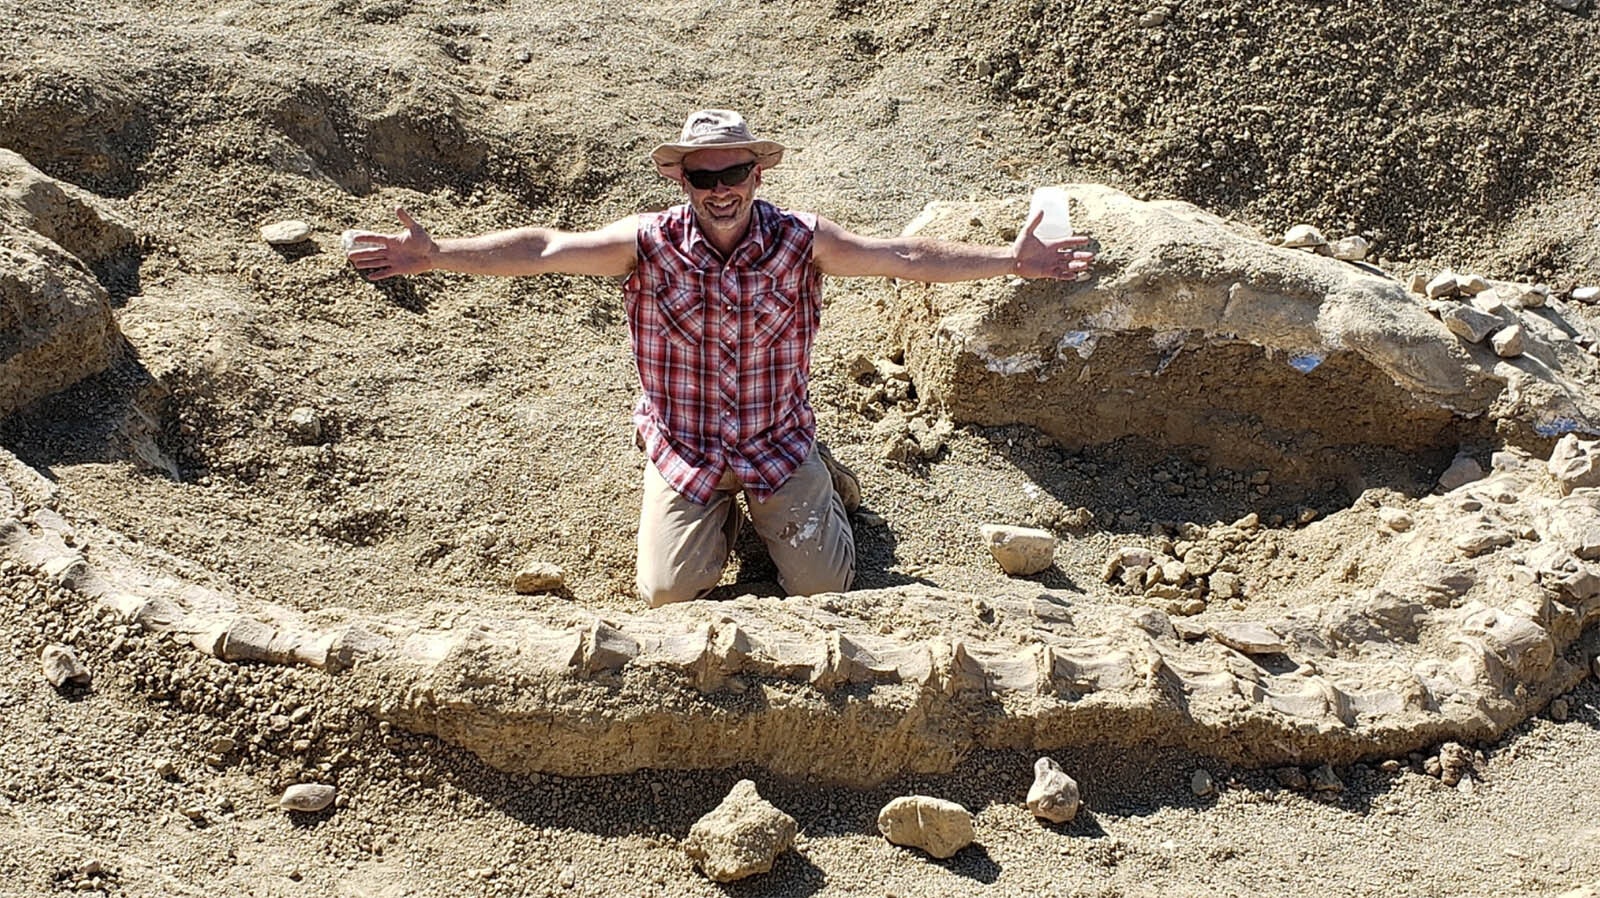 Paleontologist Jason Schein, executive director of Elevation Science Institute, shows off the articulated tail of a 150-million-year-old long-necked sauropod from the Late Jurassic Period. The tail is among thousands of other dinosaur bones found in the Anderson Site on the Montana side of the Bighorn Basin near Bridger, Montana.